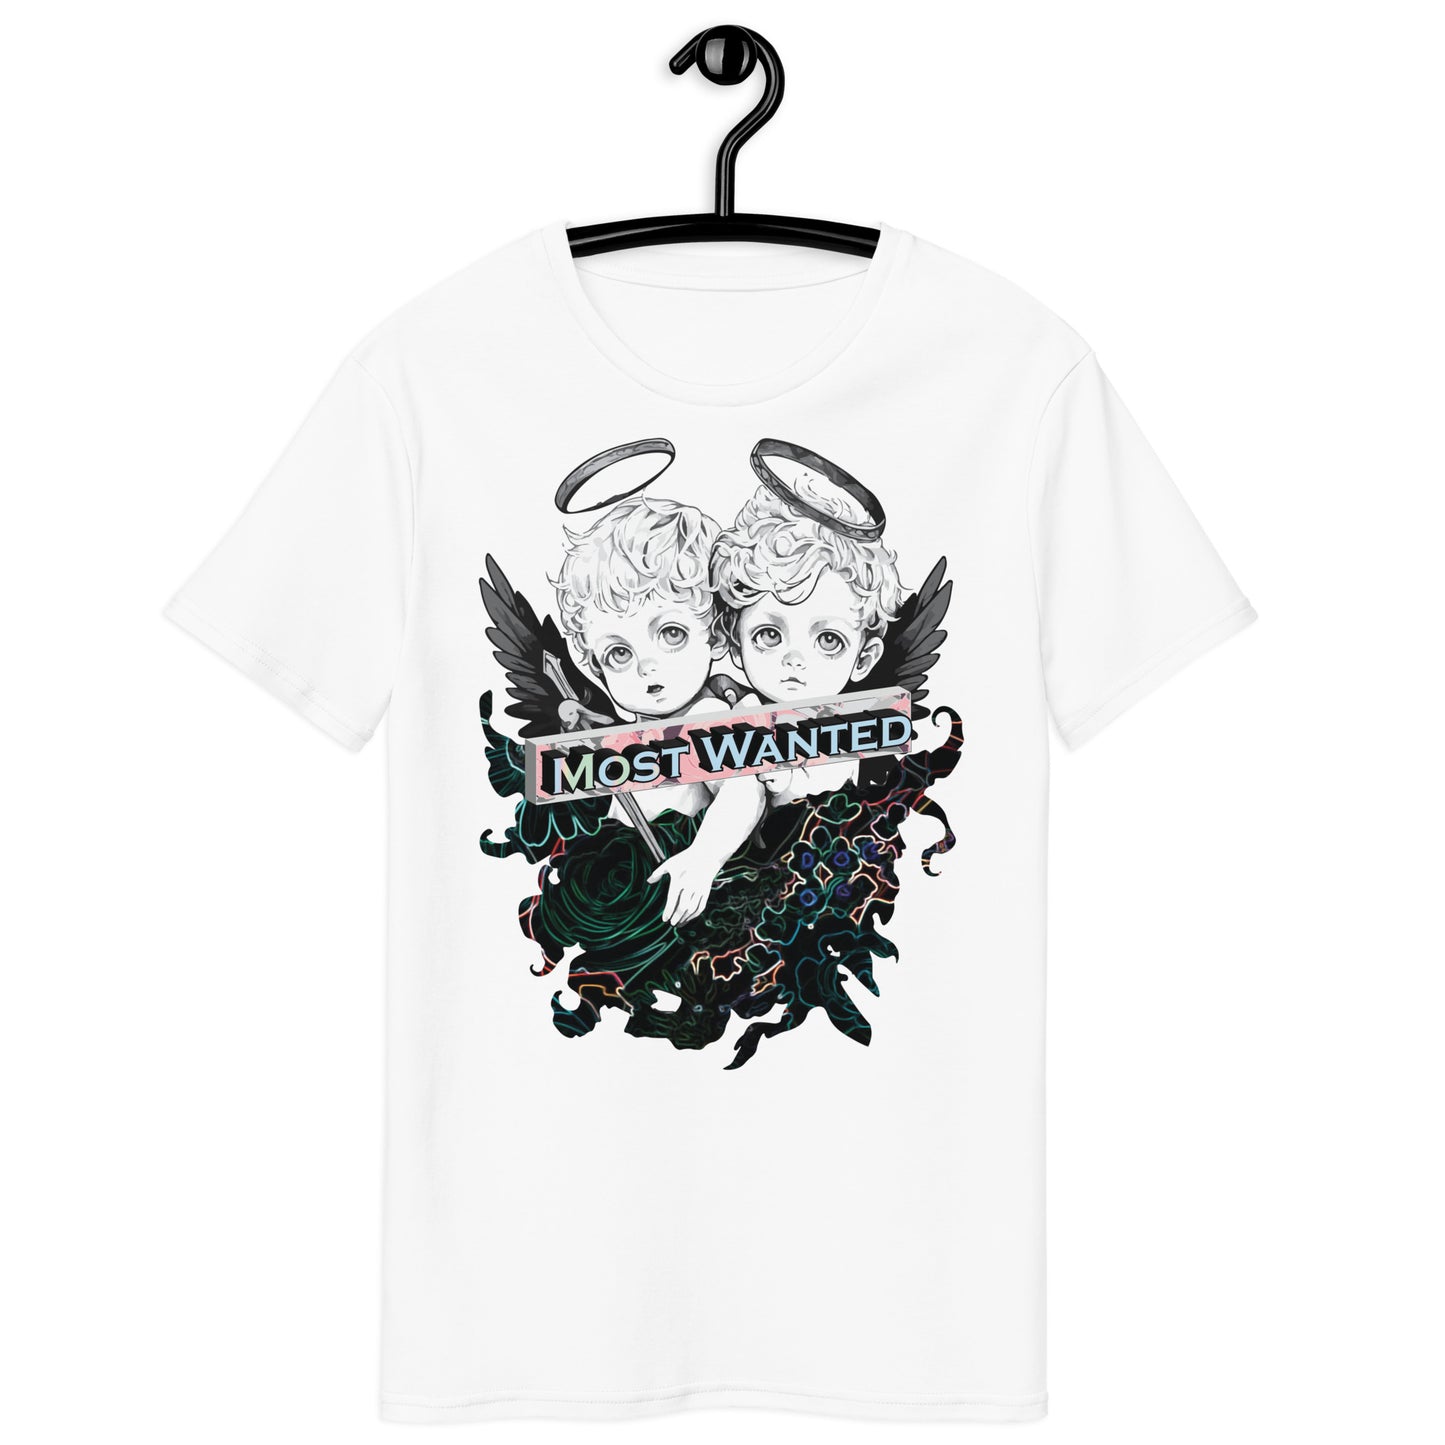 For the Love of Death (Most Wanted)  Graphic Tee